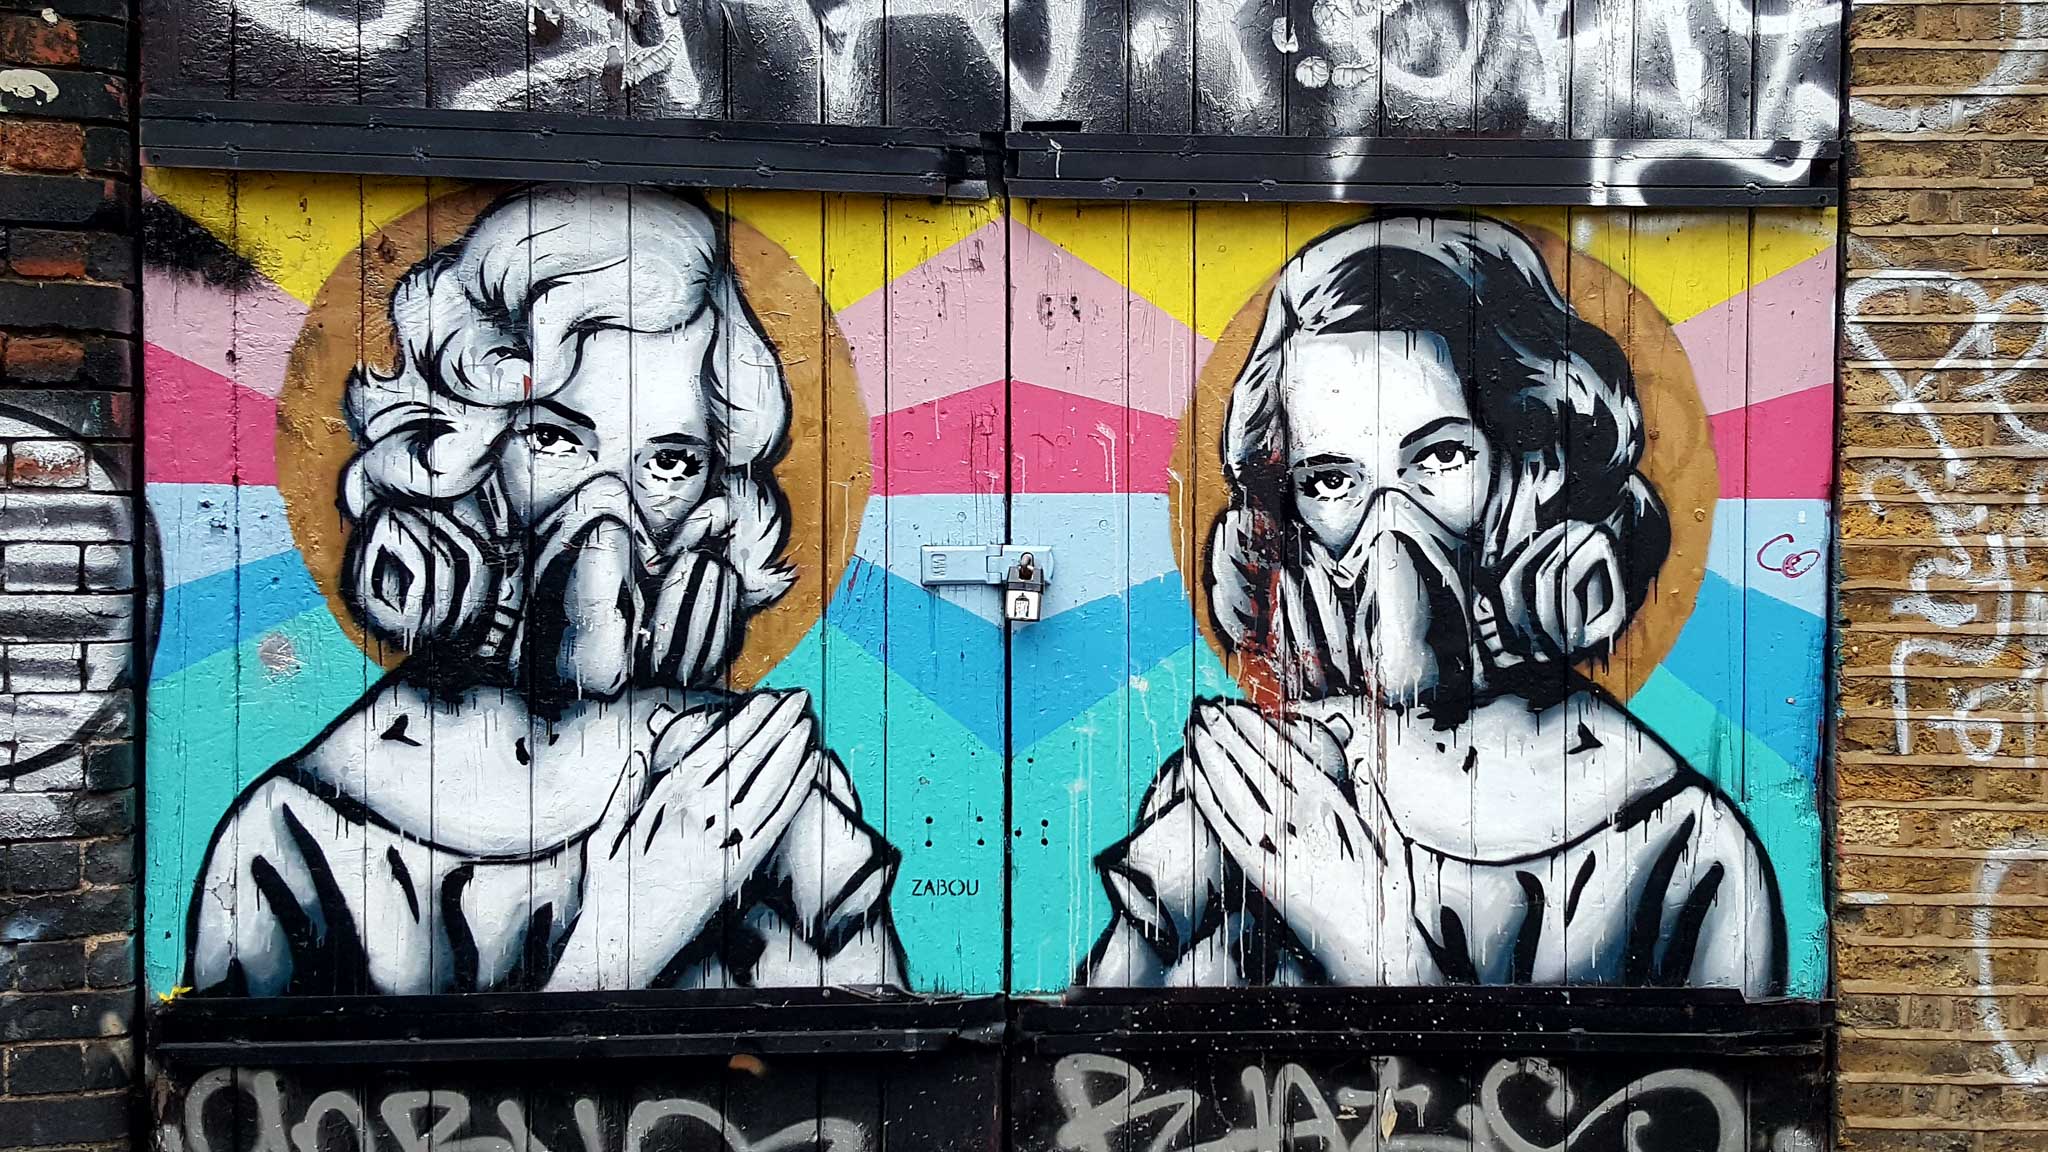 Urban art by zabou showing two women with gasmasks on a wooden door in Shoreditch, London